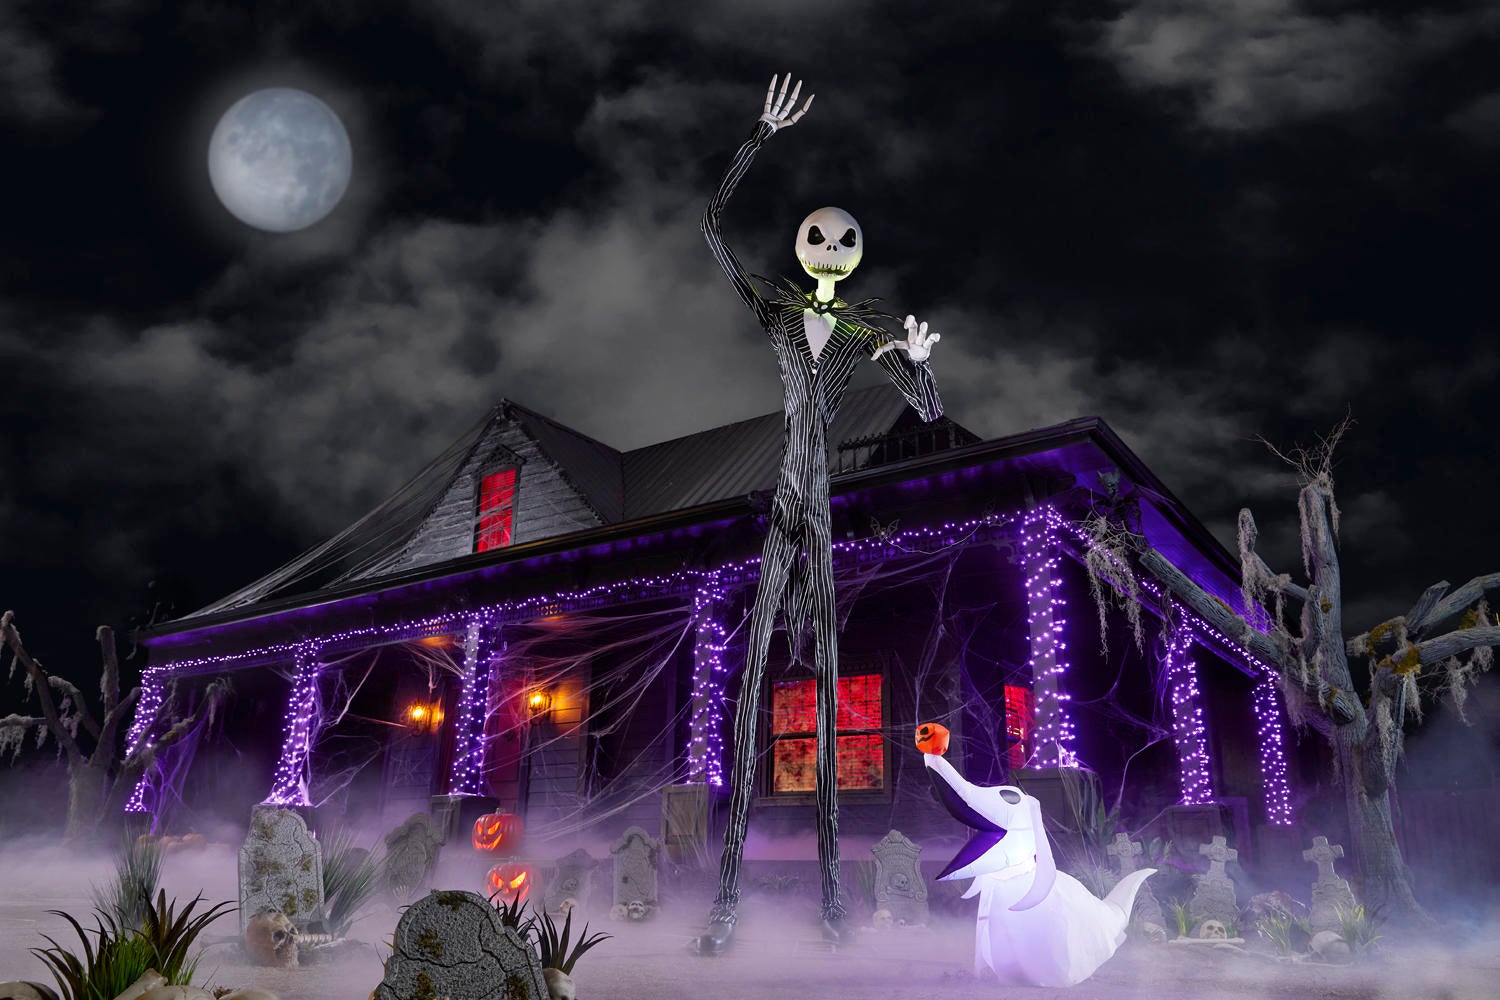 The Home Depot Adds Jack Skellington, Marsh Monster, and More to